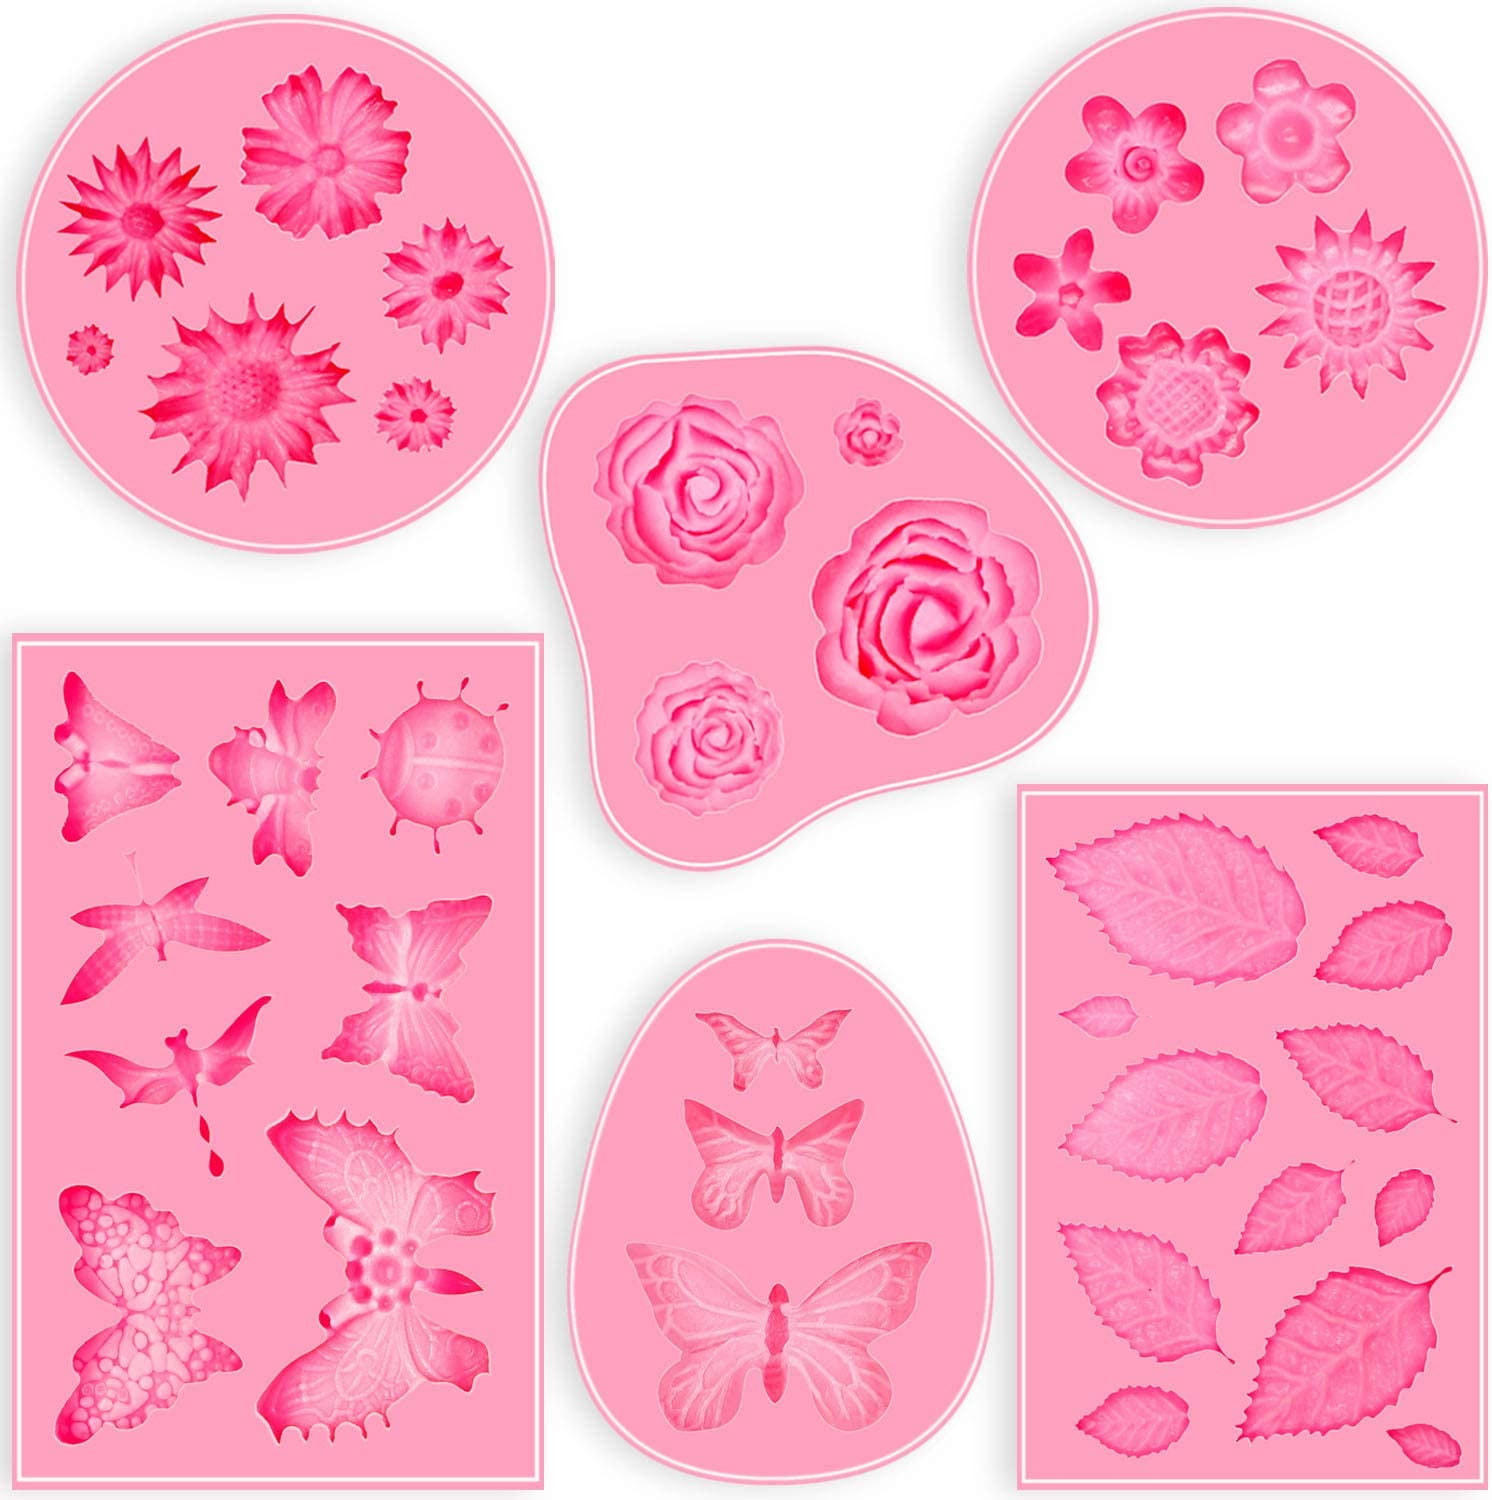  Flower Fondant Molds - 8 Pcs Flower and Butterfly Candy  Silicone Molds for Chocolate Fondant Polymer Clay Soap Crafting Projects &  Cake Decoration : Arts, Crafts & Sewing